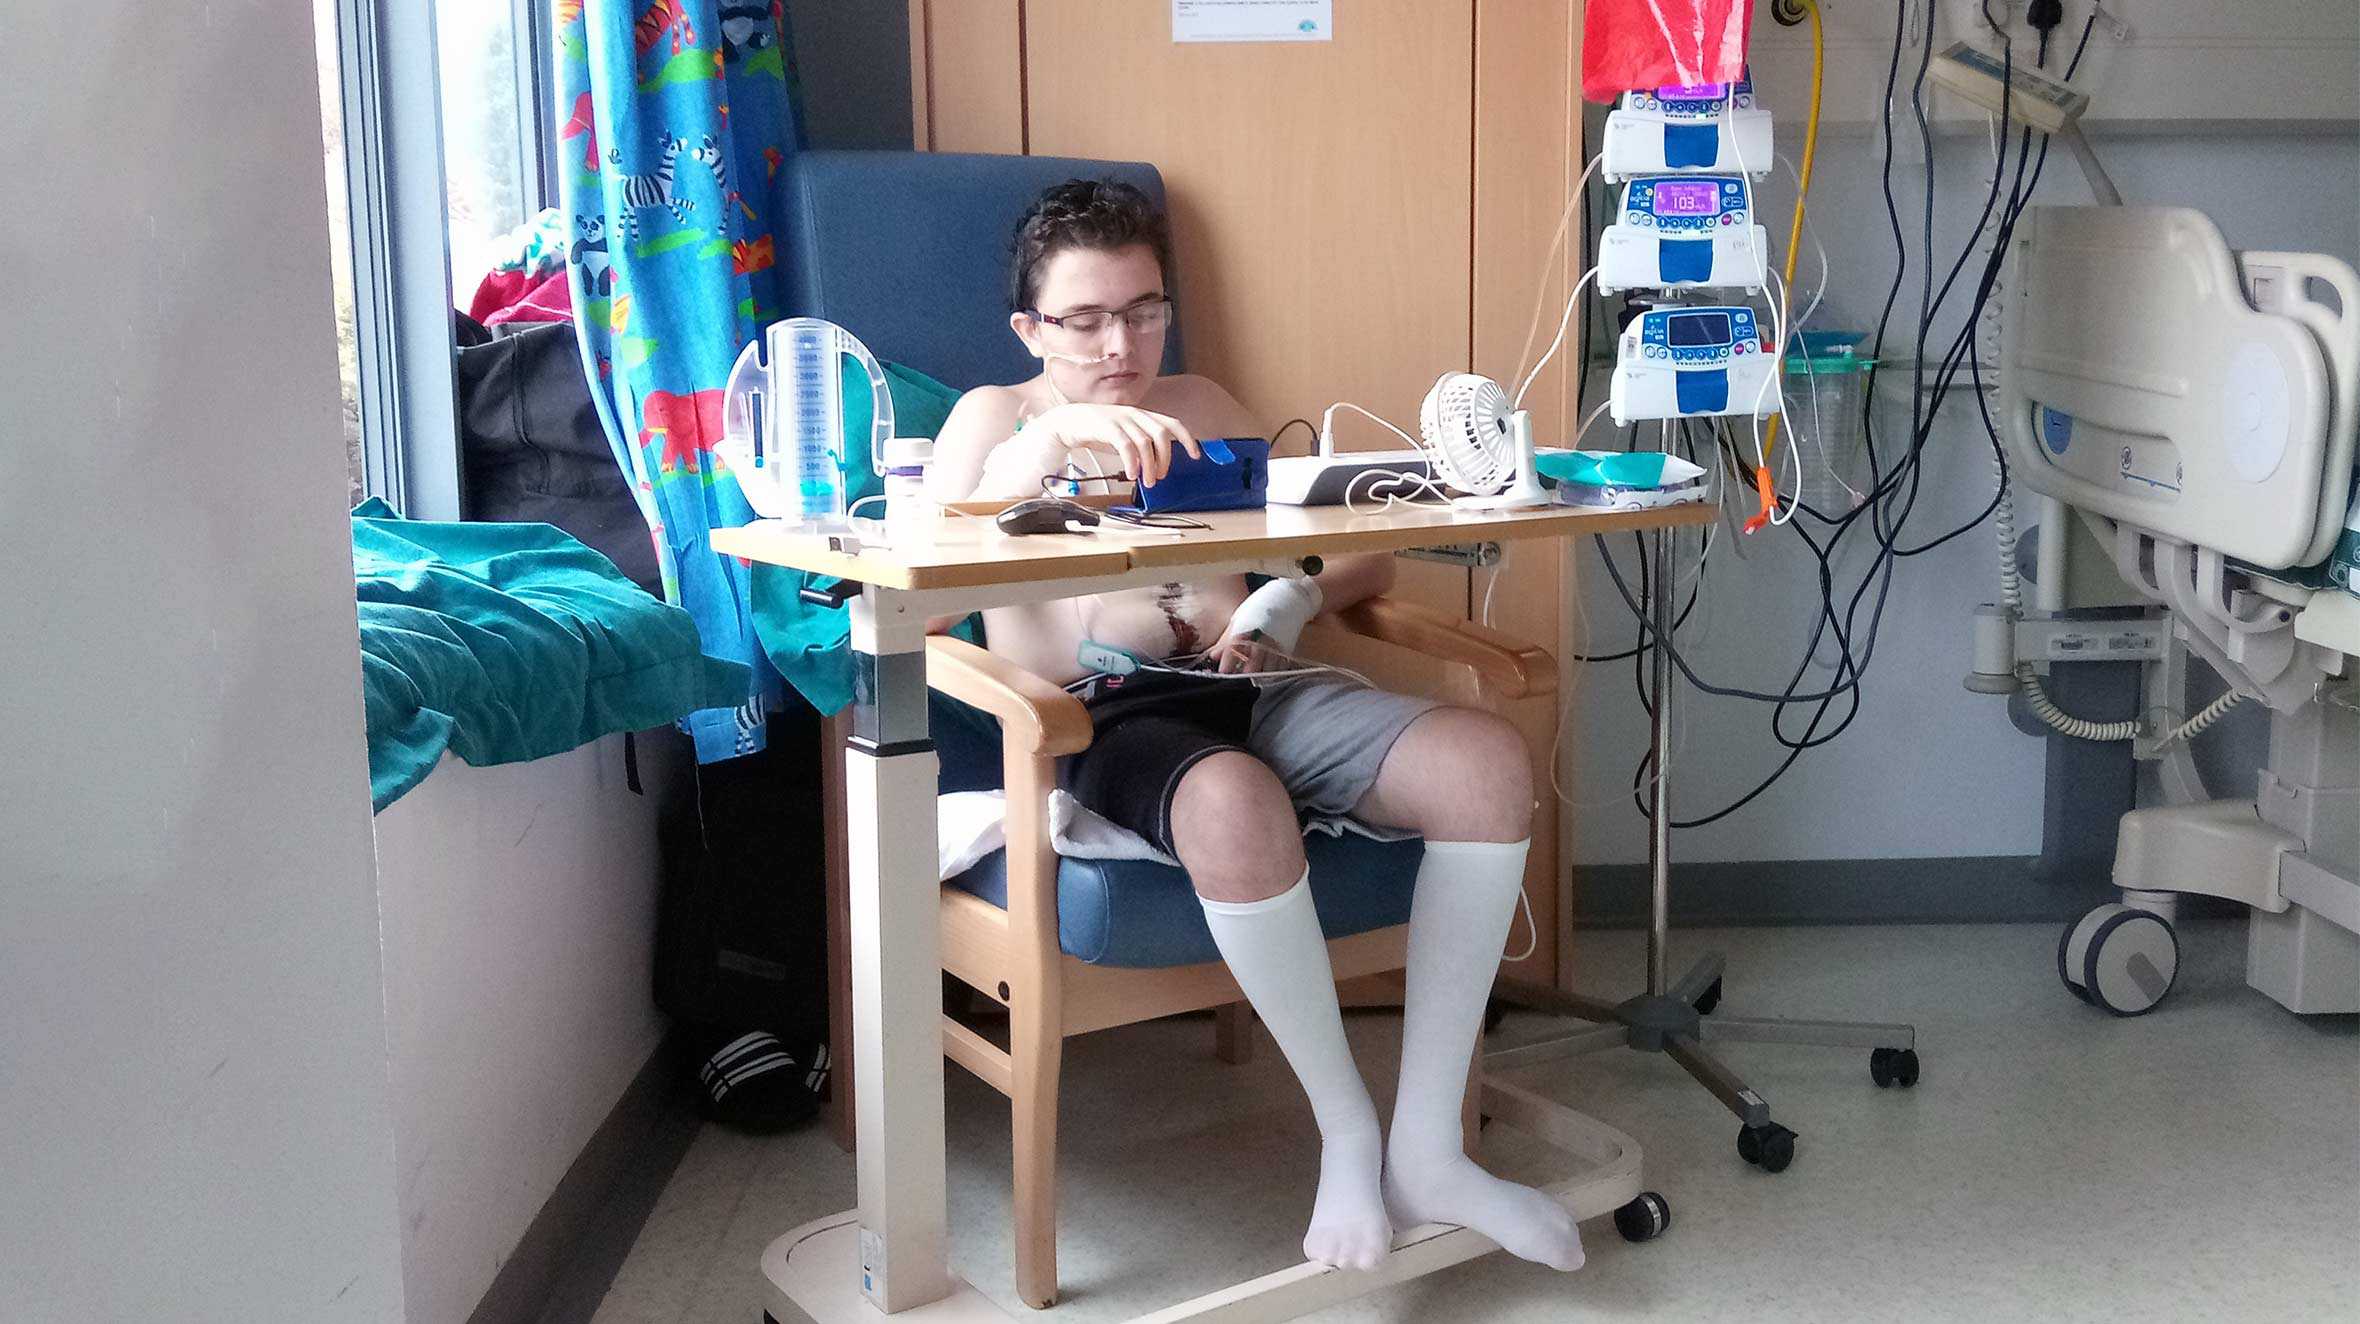 Evan sitting in a chair in a hospital ward, attached to monitoring equipment after his operation.